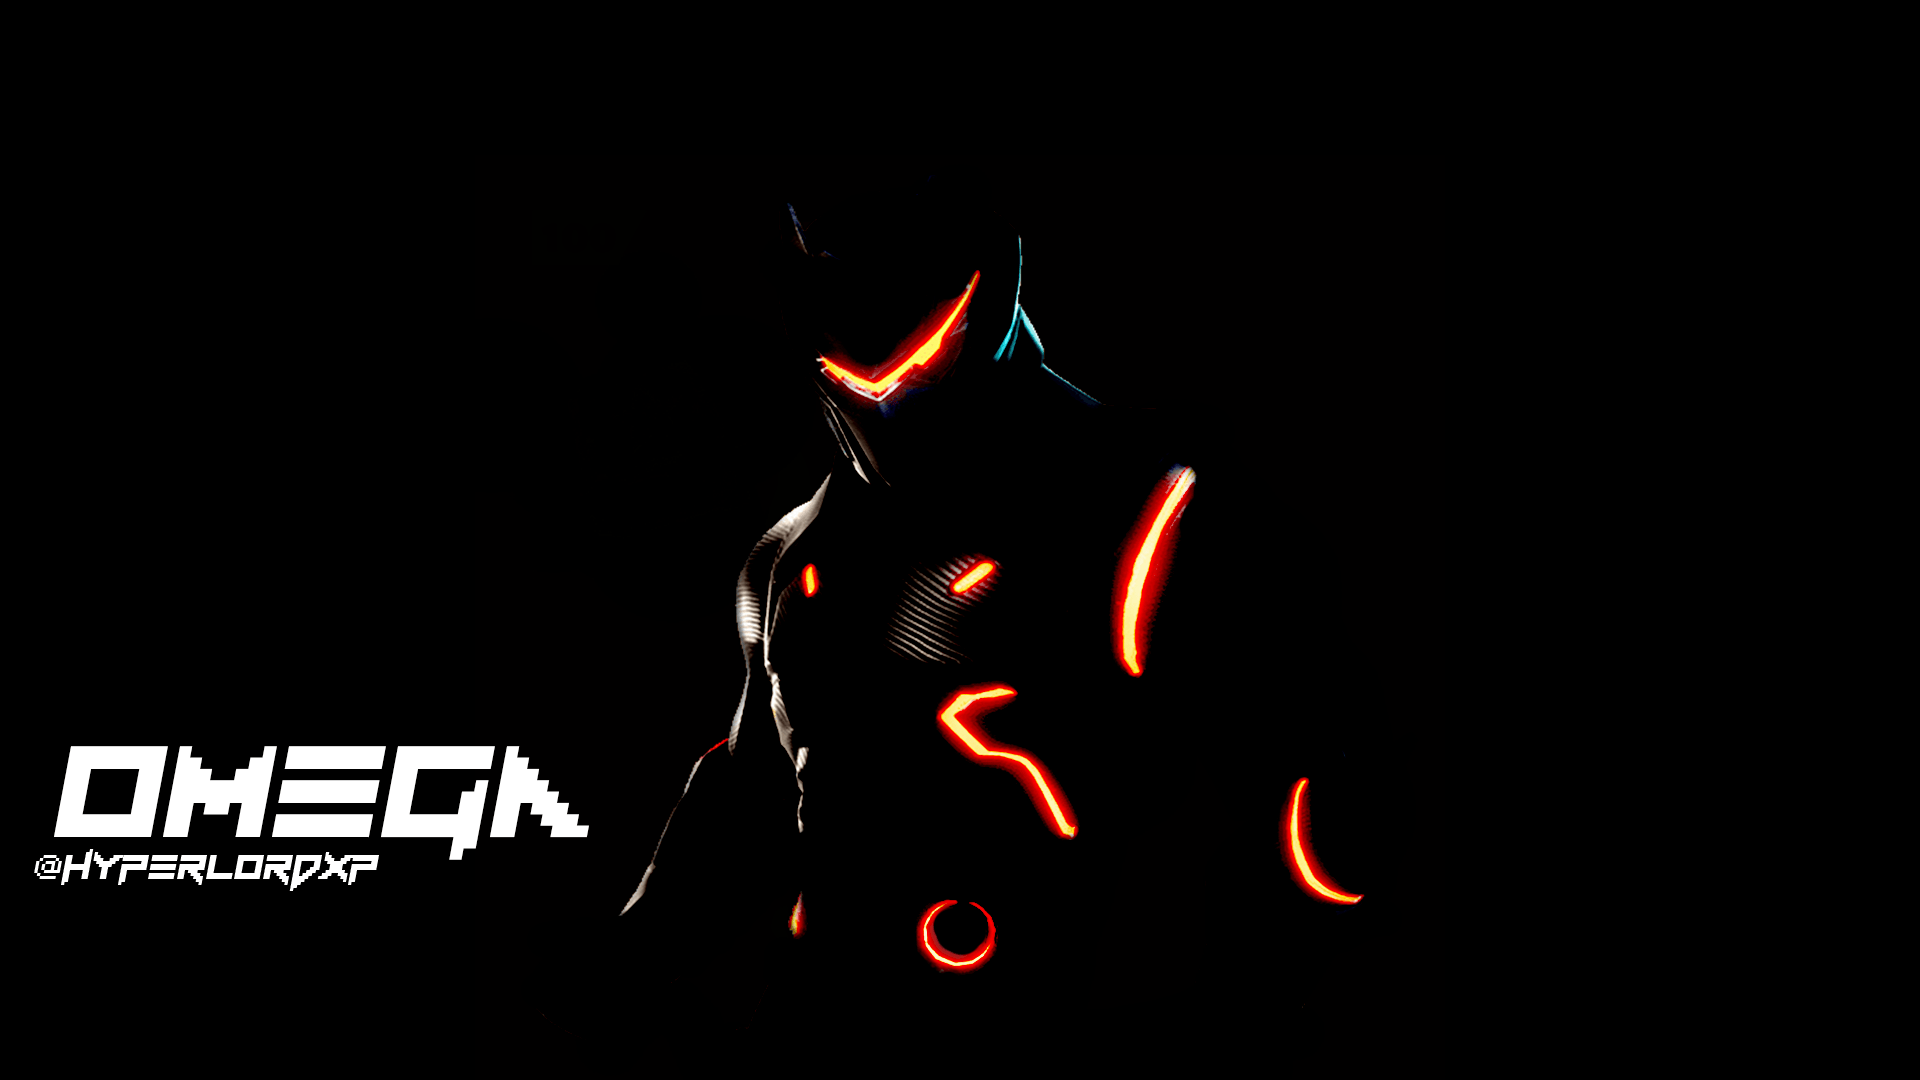 Free download Made a wallpaper from the Omega battle pass